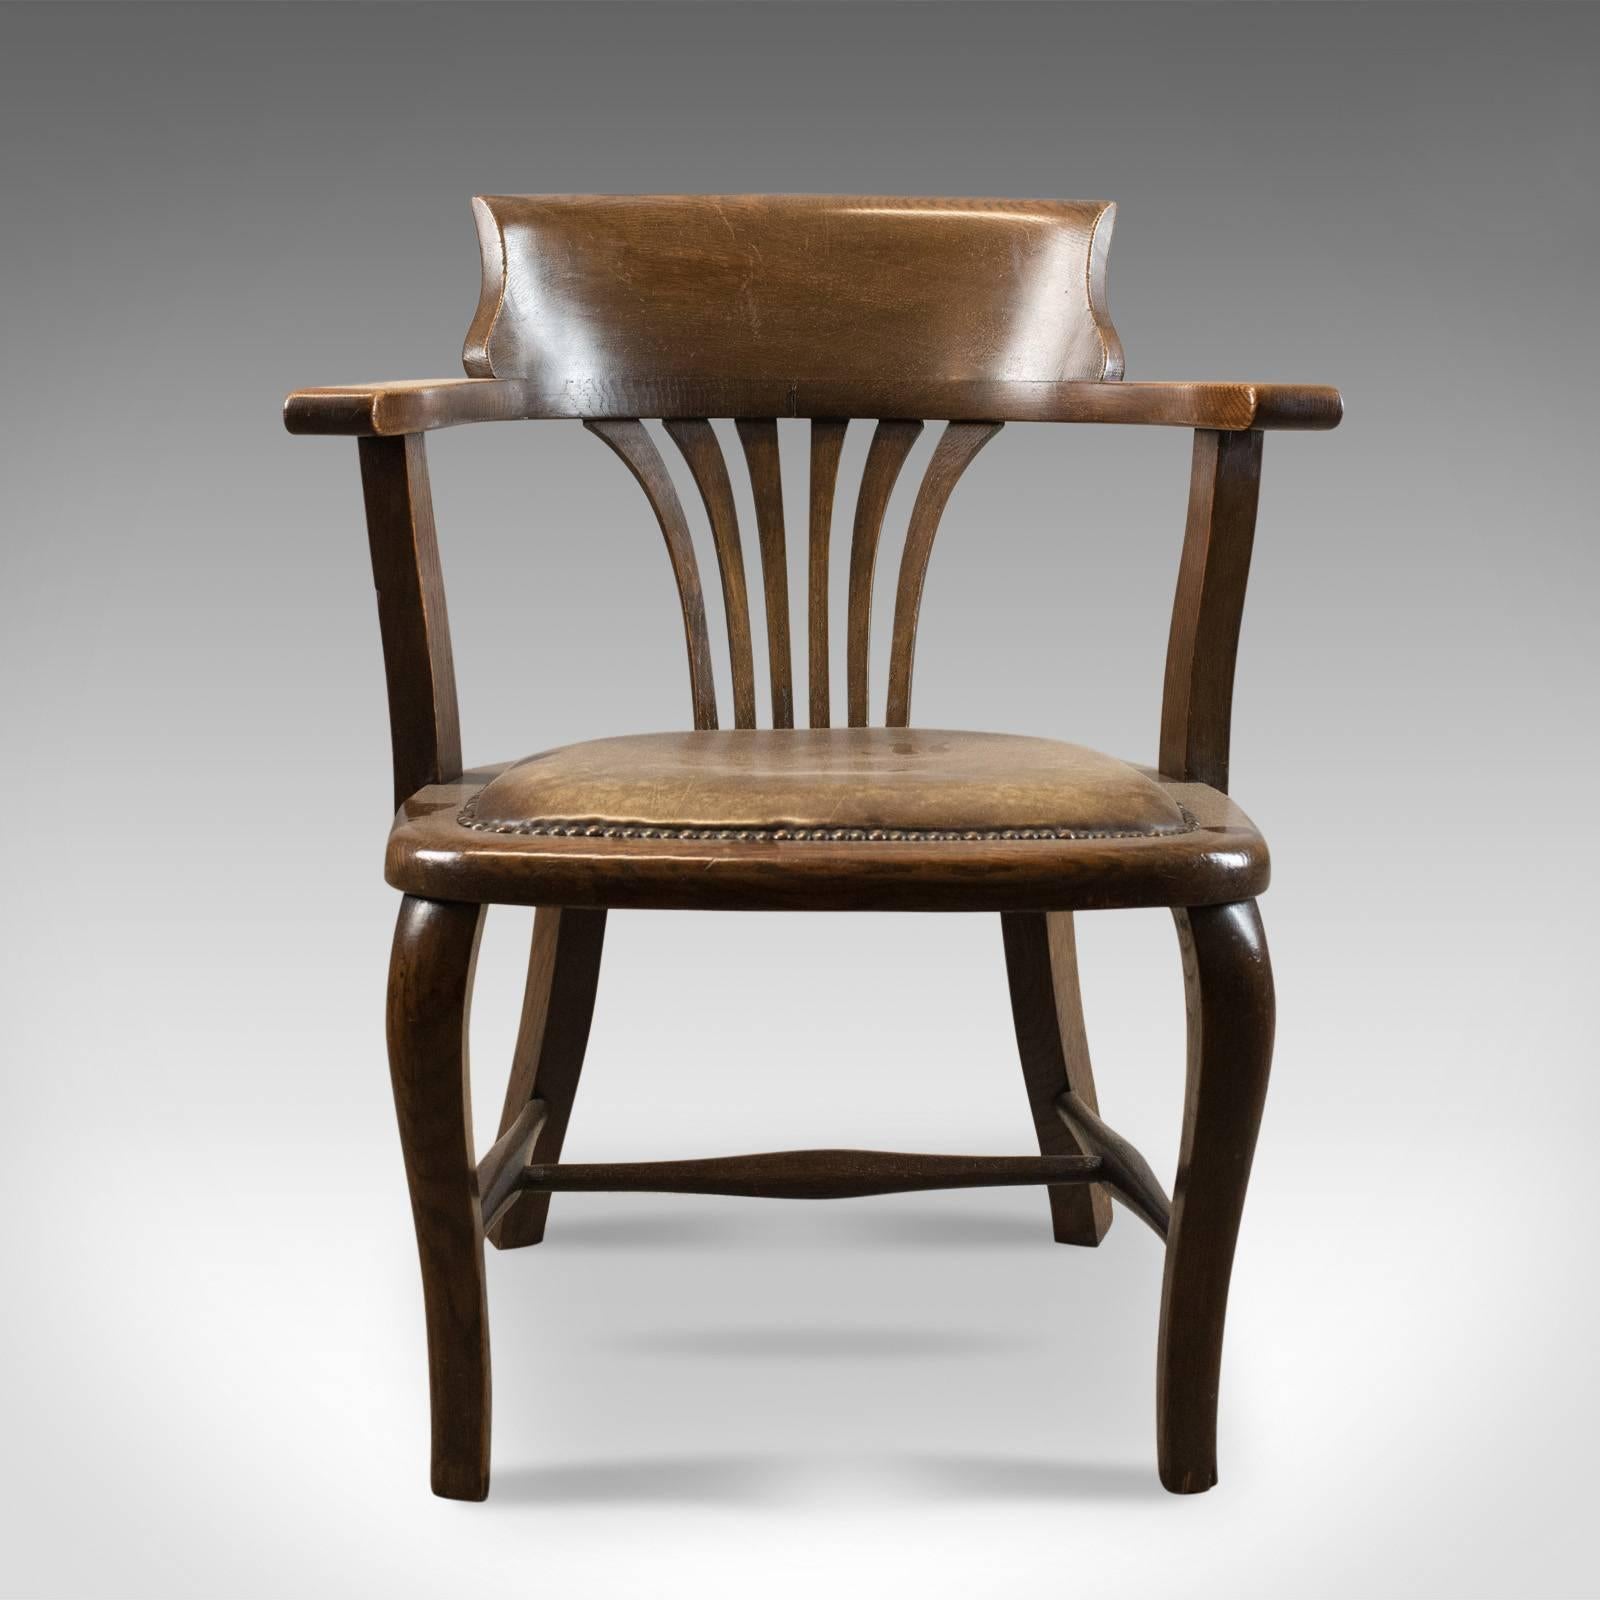 This is an antique Captain's chair, an English, oak bow-back with leather seat dating to the Edwardian period, circa 1910.

Crafted in English oak with good consistent color
Solidly made with desirable aged patina
Oblique cabriole legs to the